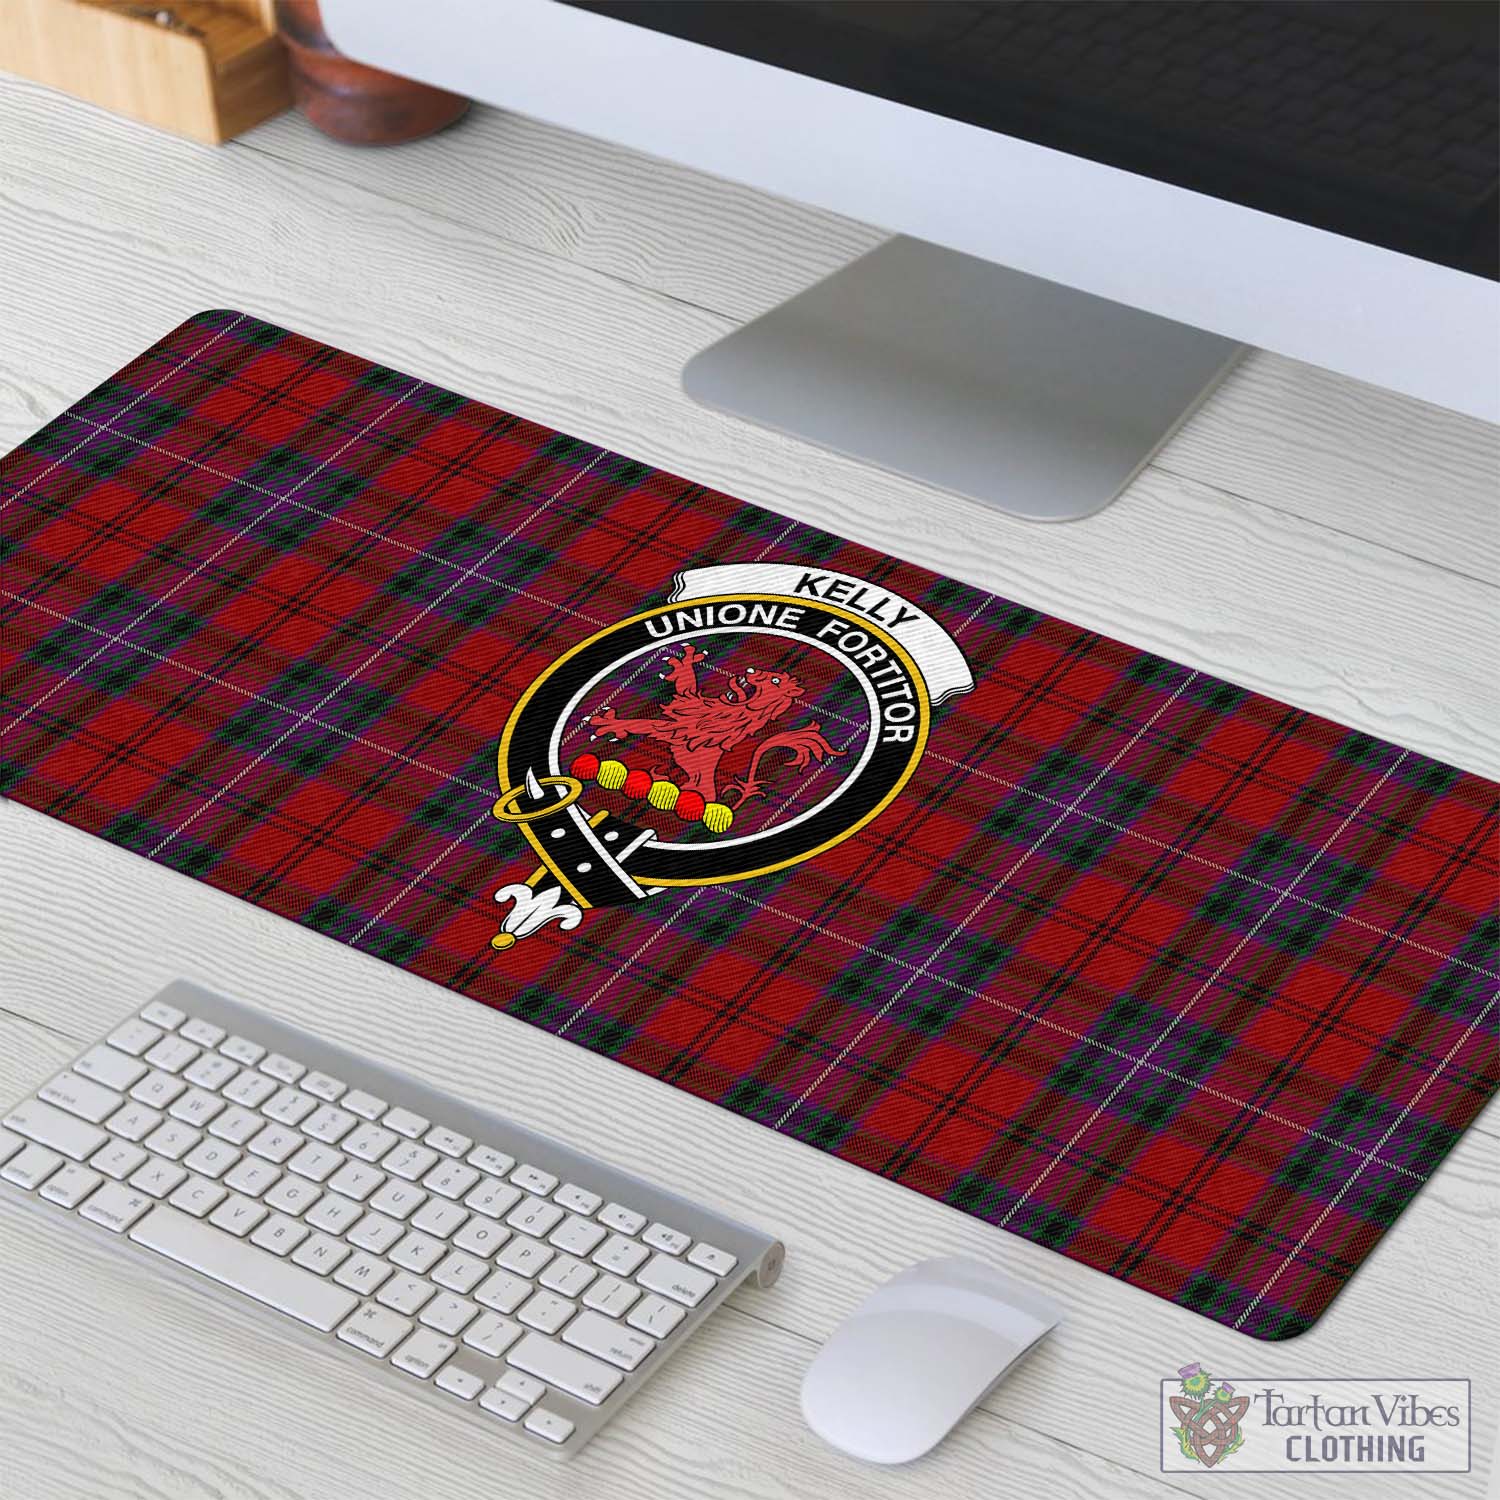 Tartan Vibes Clothing Kelly of Sleat Red Tartan Mouse Pad with Family Crest